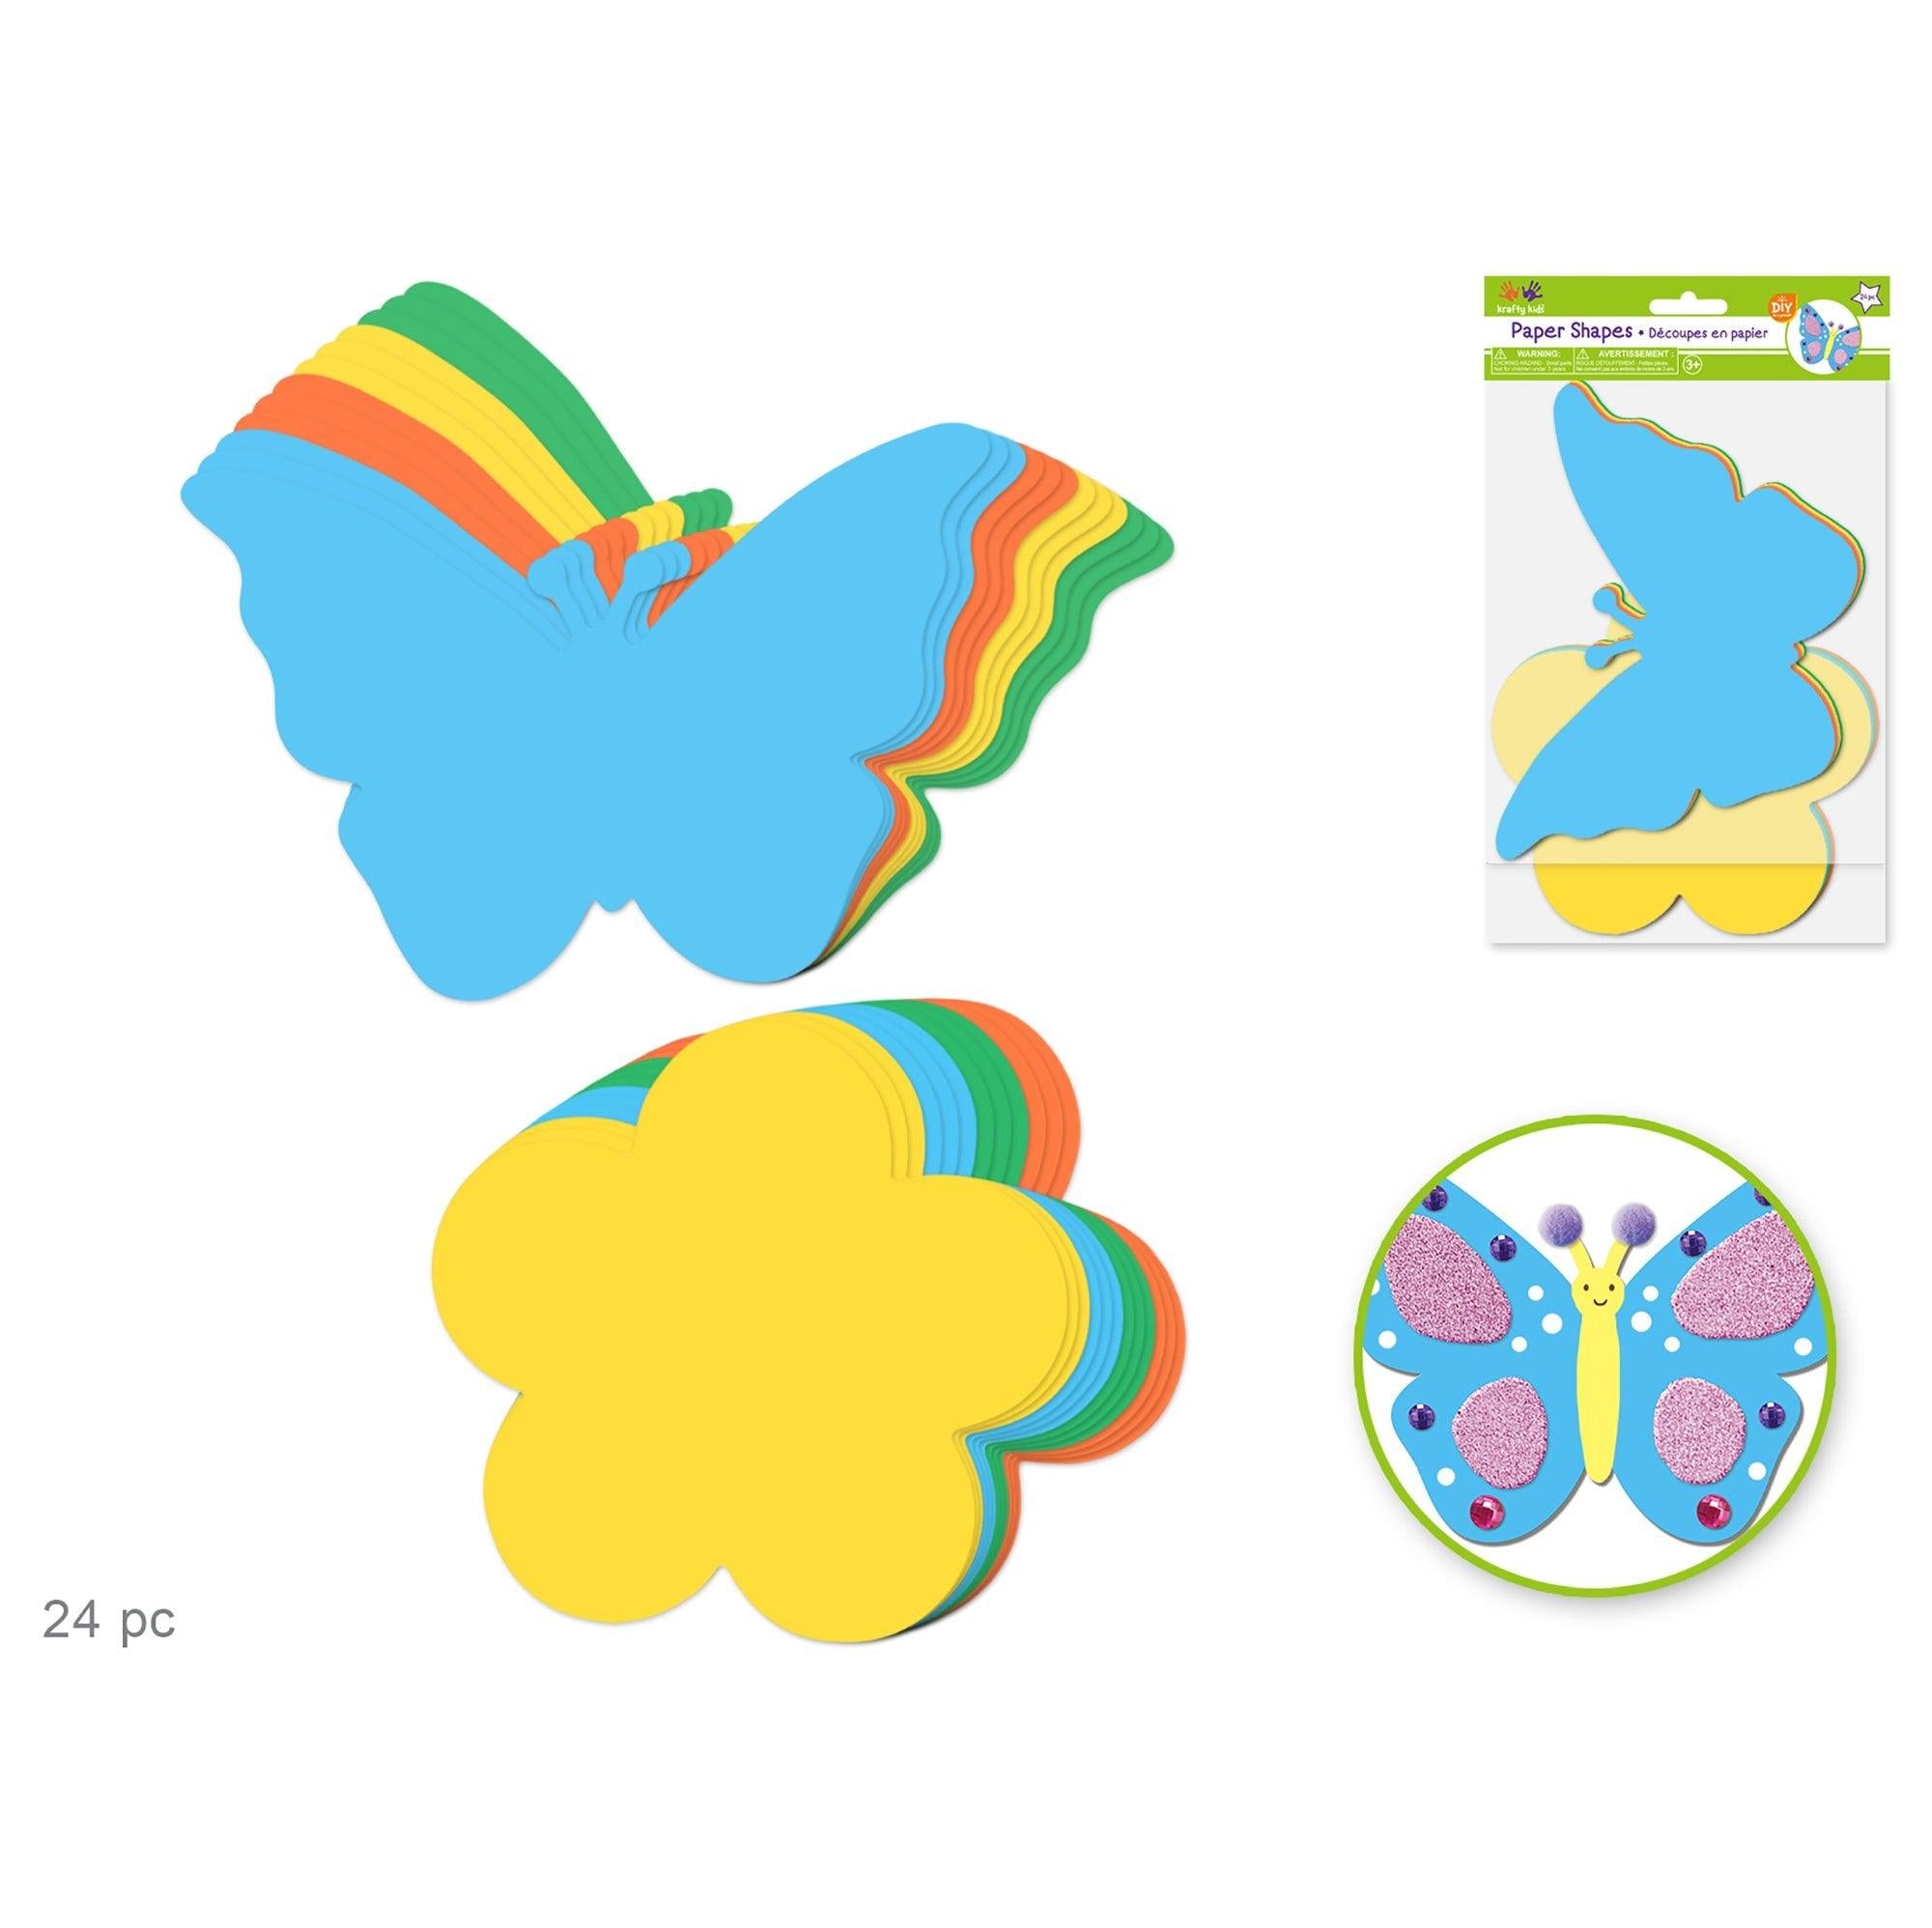 Krafty Kids Diecut Paper Shapes DIY Craft for Kidspc 2-Layer Style Butterfly & Daisy - Dollar Max Depot